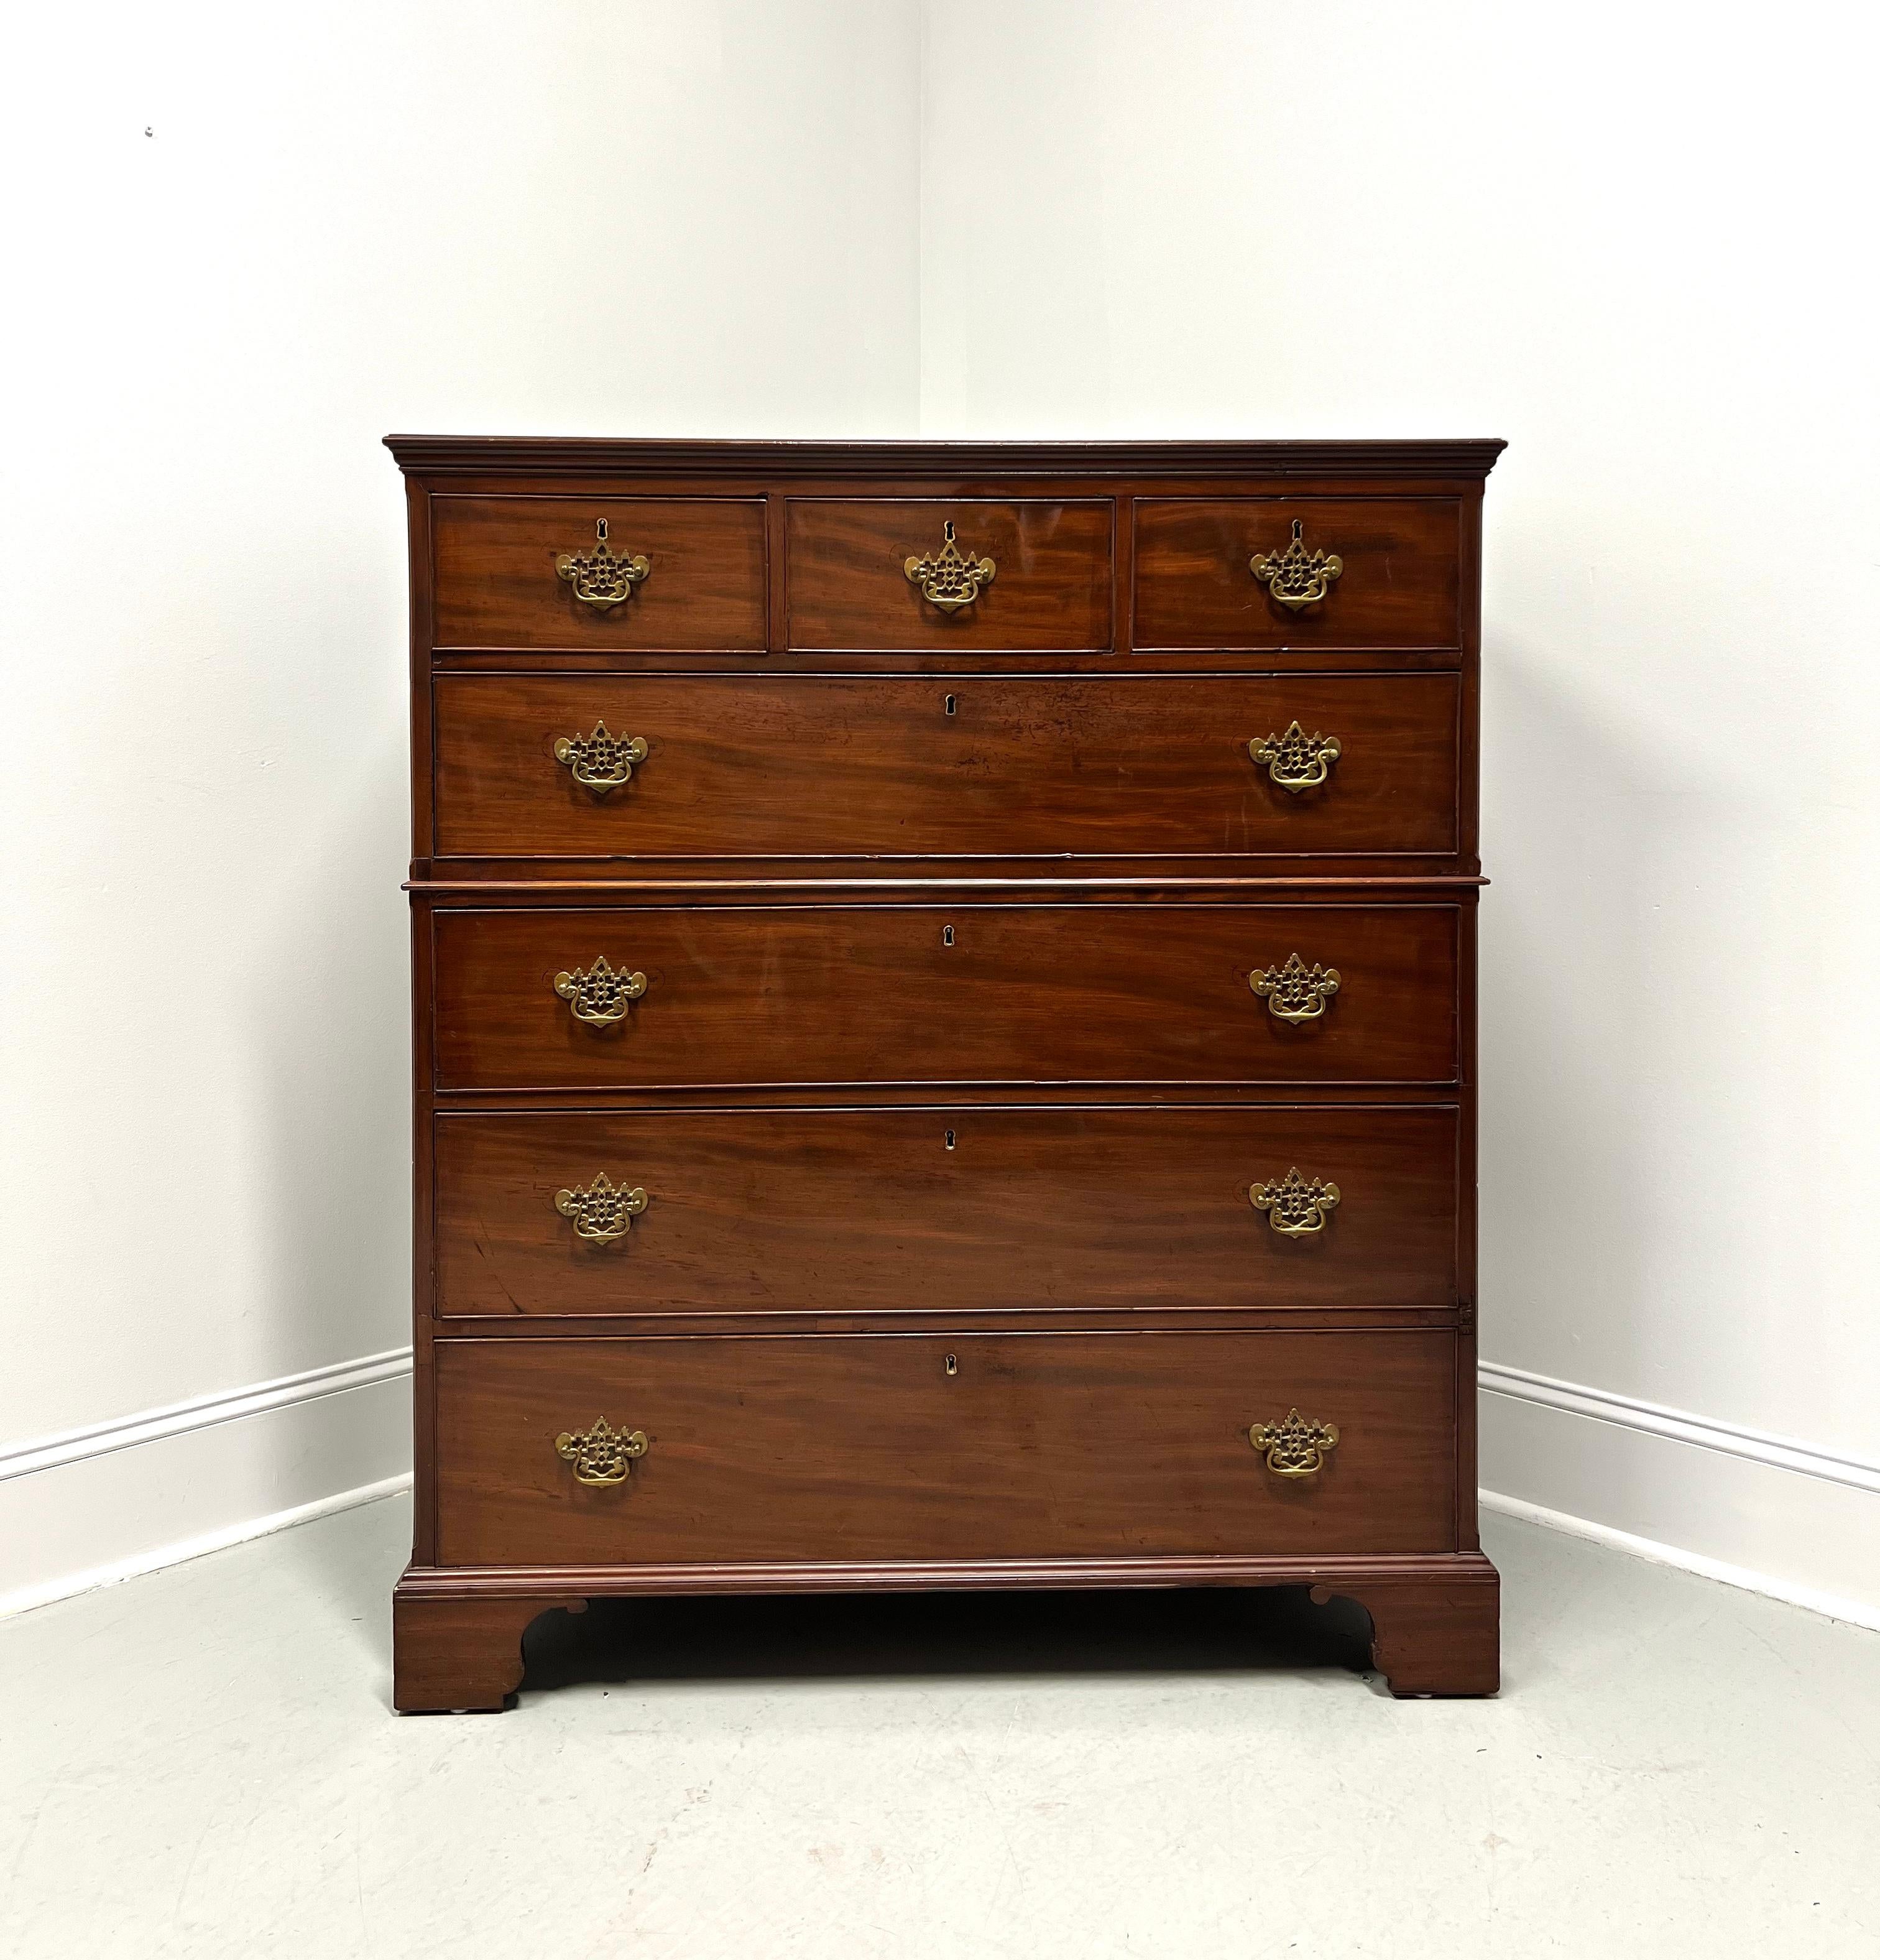 An antique 18th Century extra-large chest on chest of drawers in the  Chippendale style, unbranded. Mahogany with bevel edge to the top, later added decorative brass hardware, bevel edge dividing chests, and bracket feet. Features three smaller over